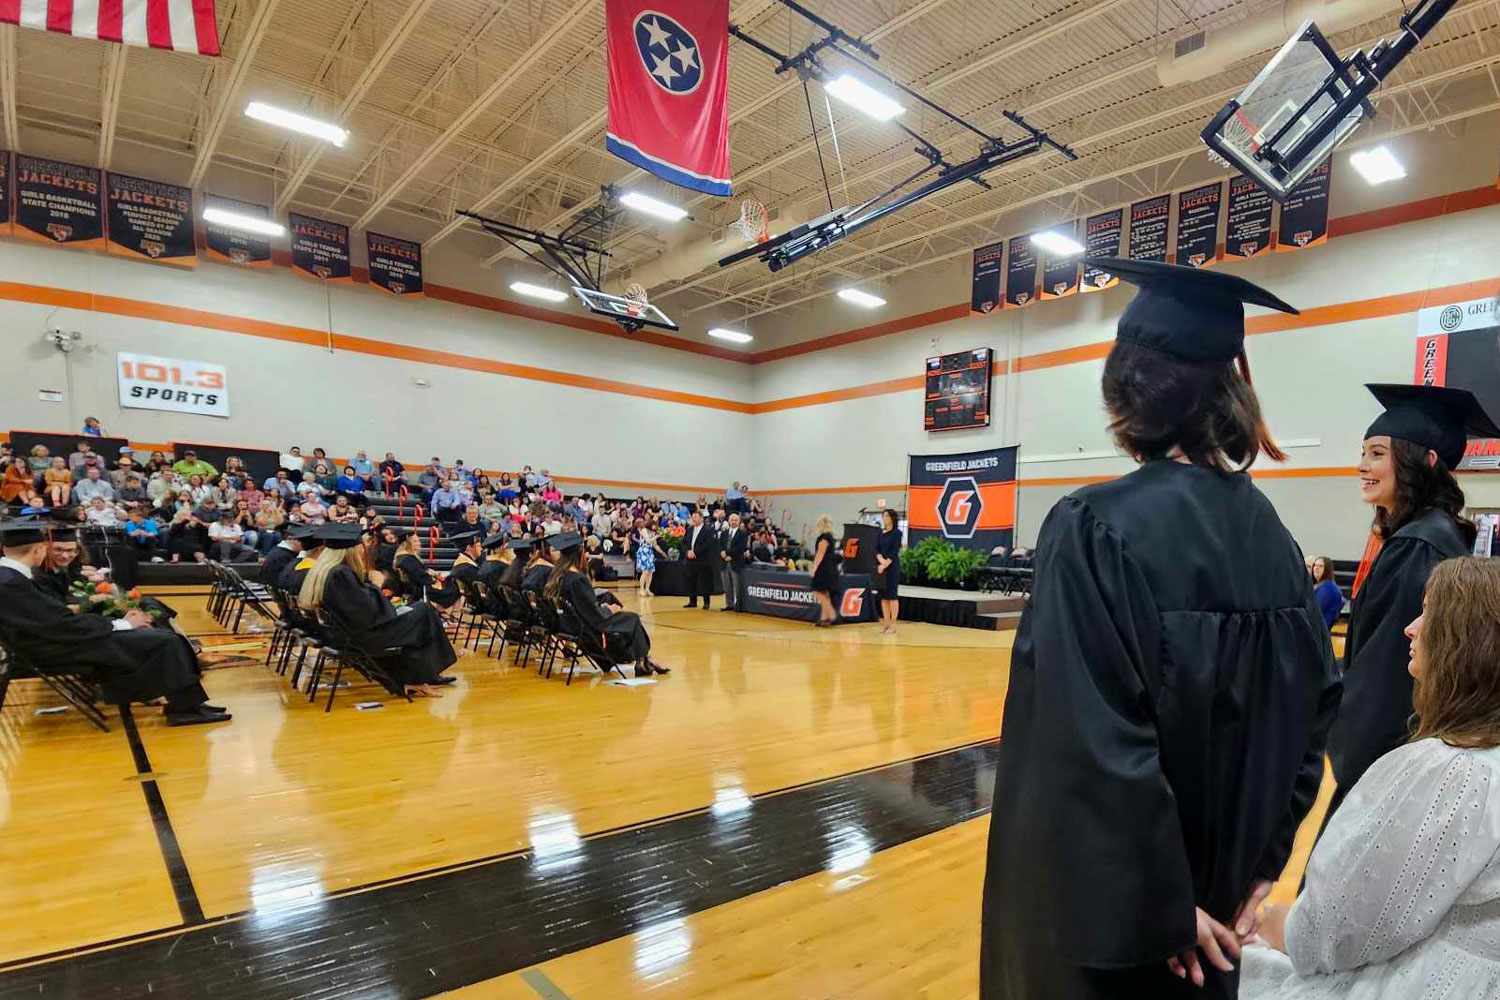 High School Student with Disability Felt 'Robbed' After Having to Sit in Audience for Graduation